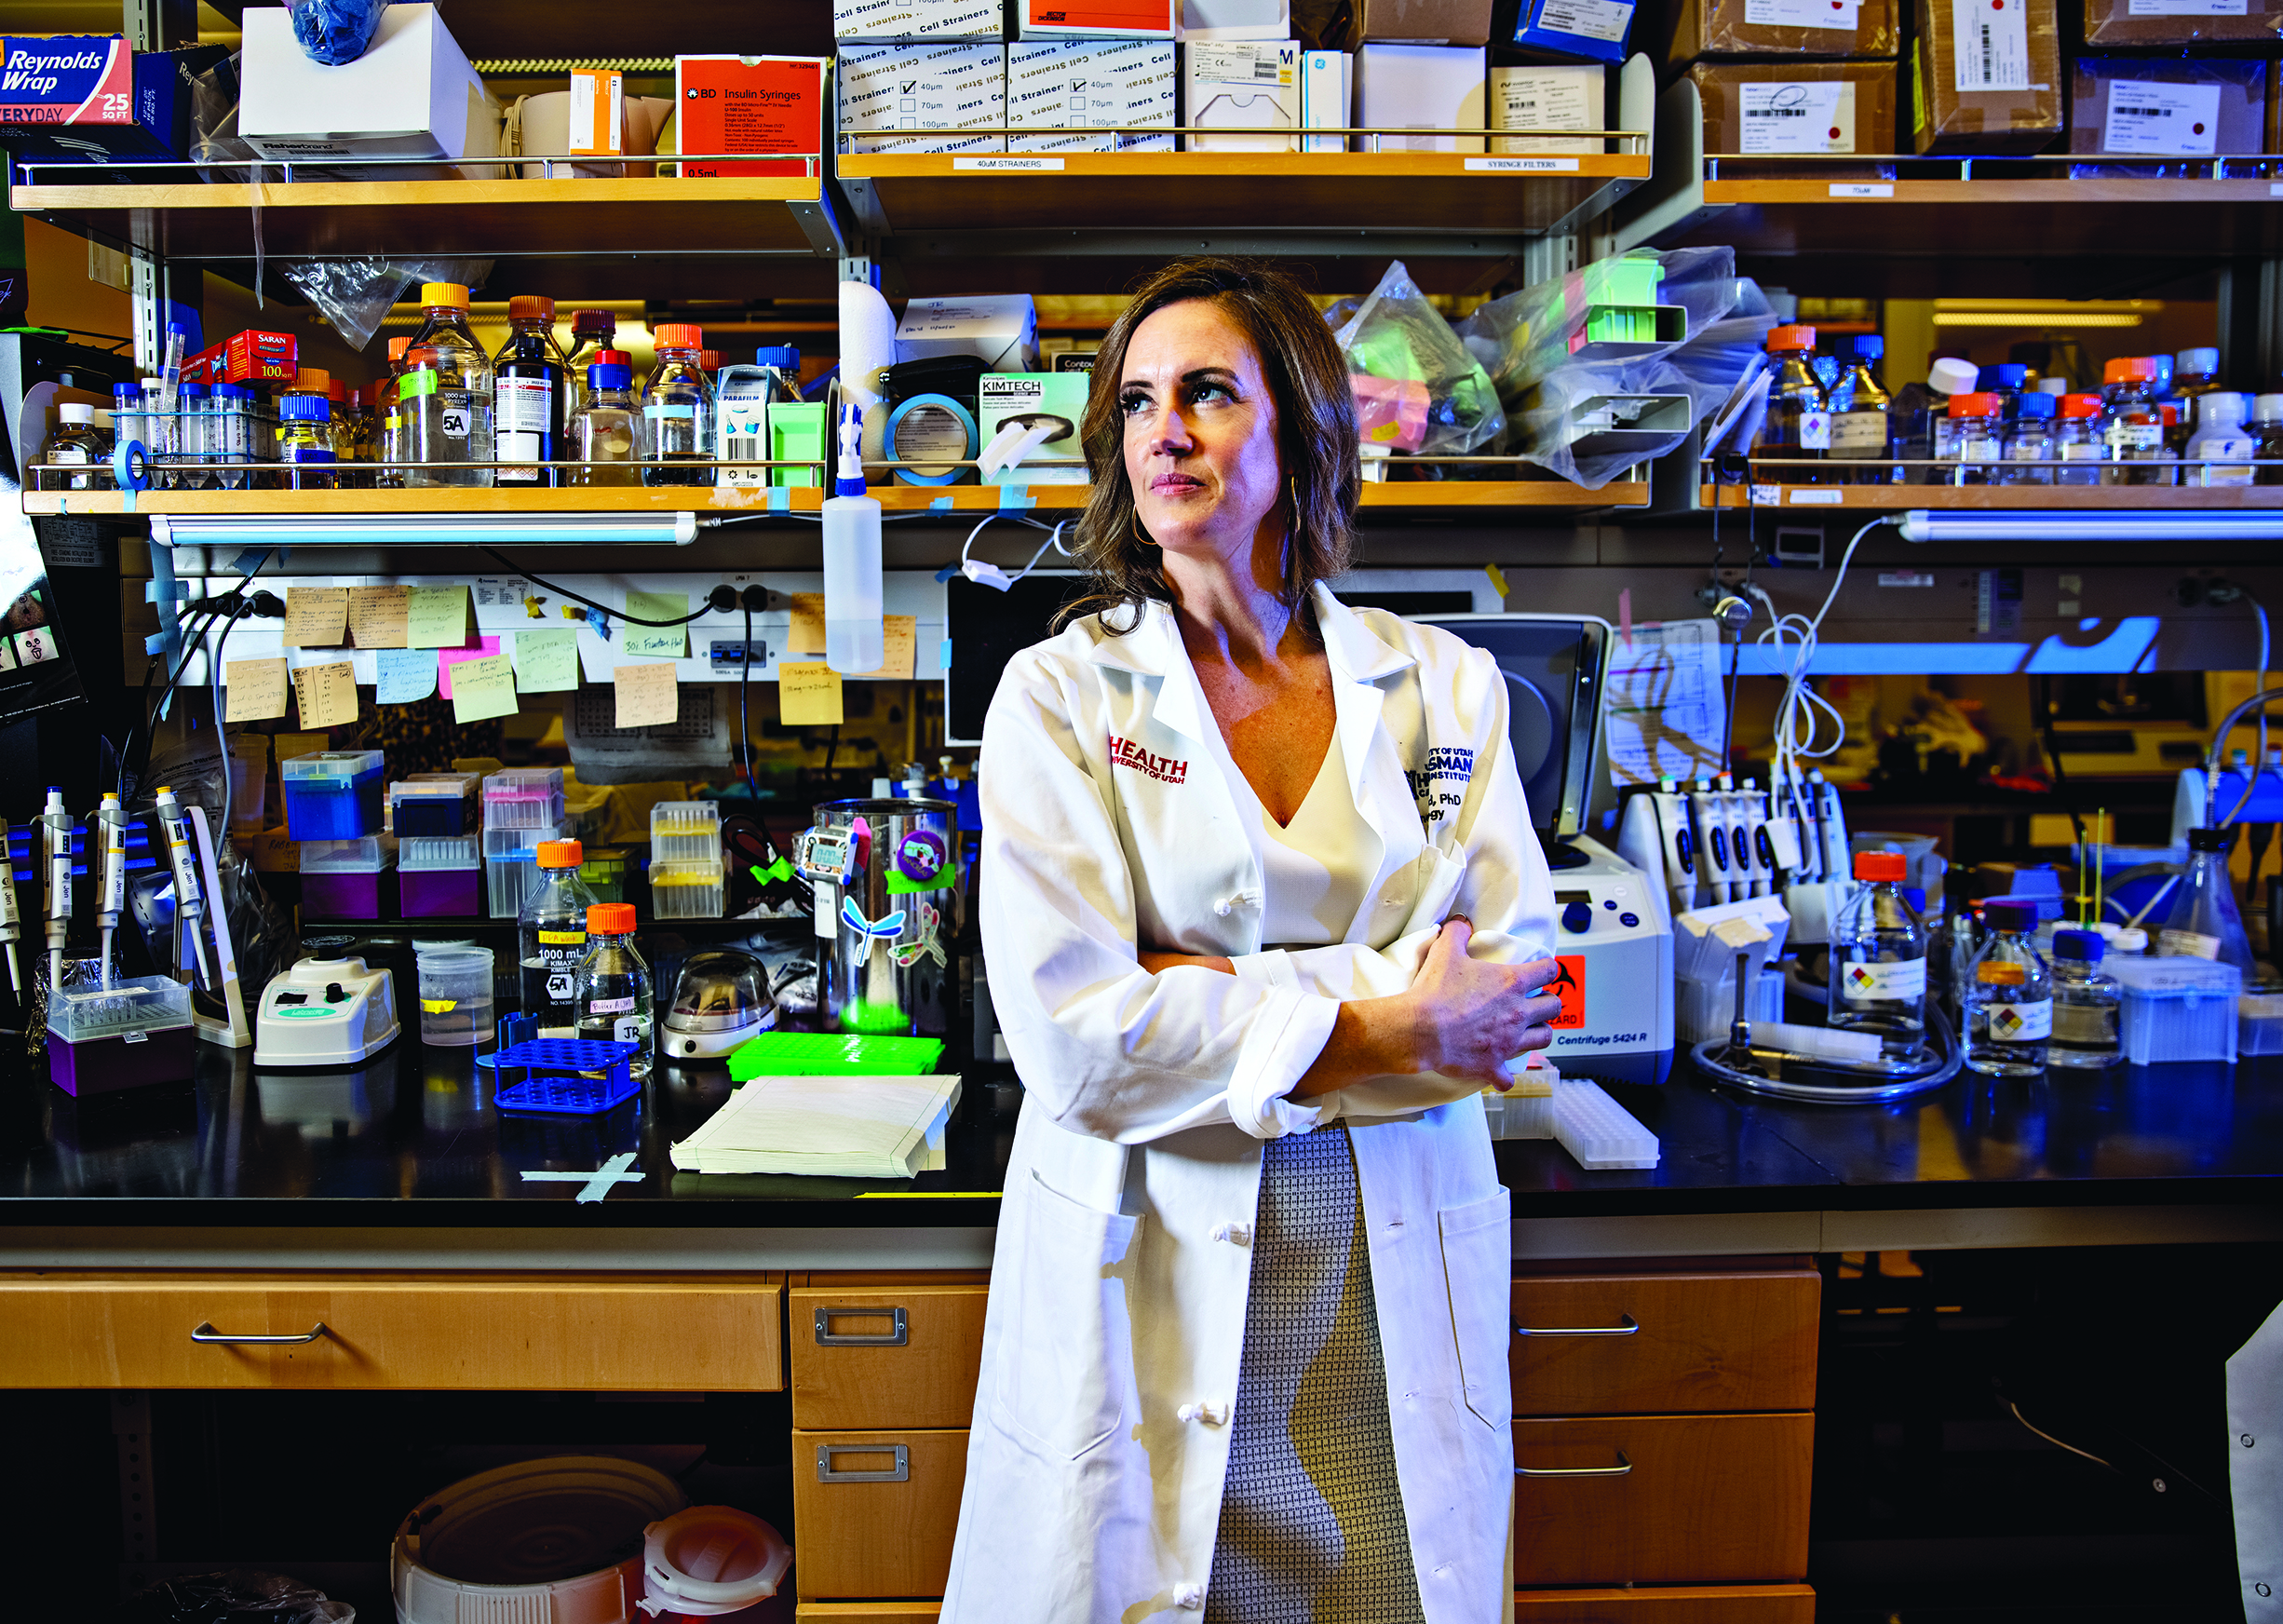 Professor June Round, PhD, standing in her laboratory. There is a lot of equipment on the shelves.